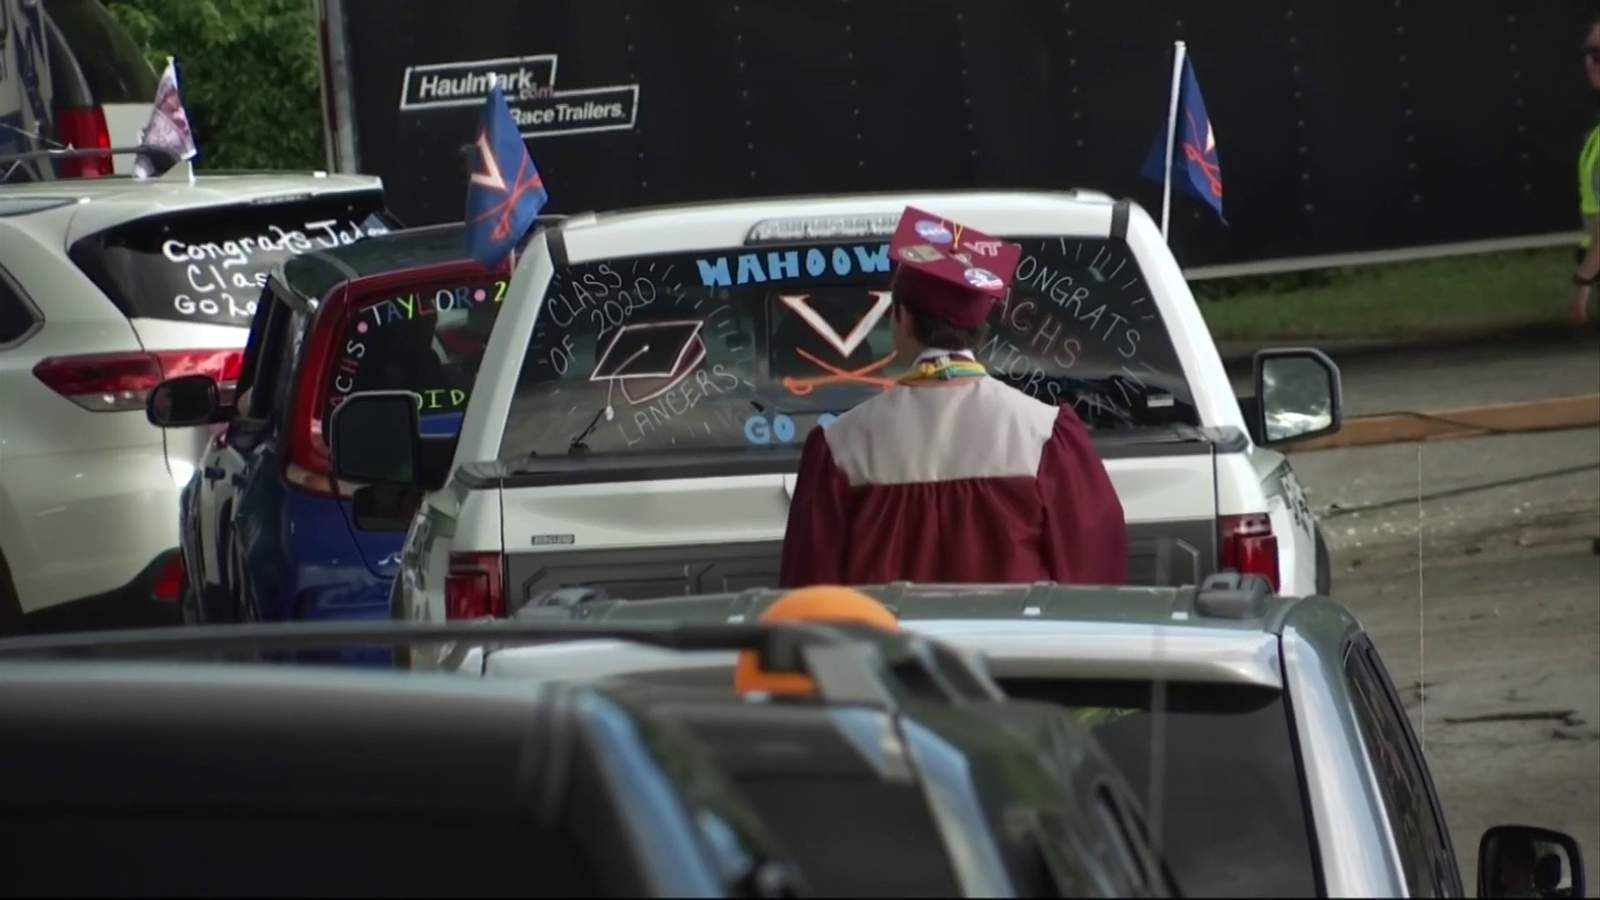 ‘We will go down in history’: Amherst County graduates experience commencement from their cars